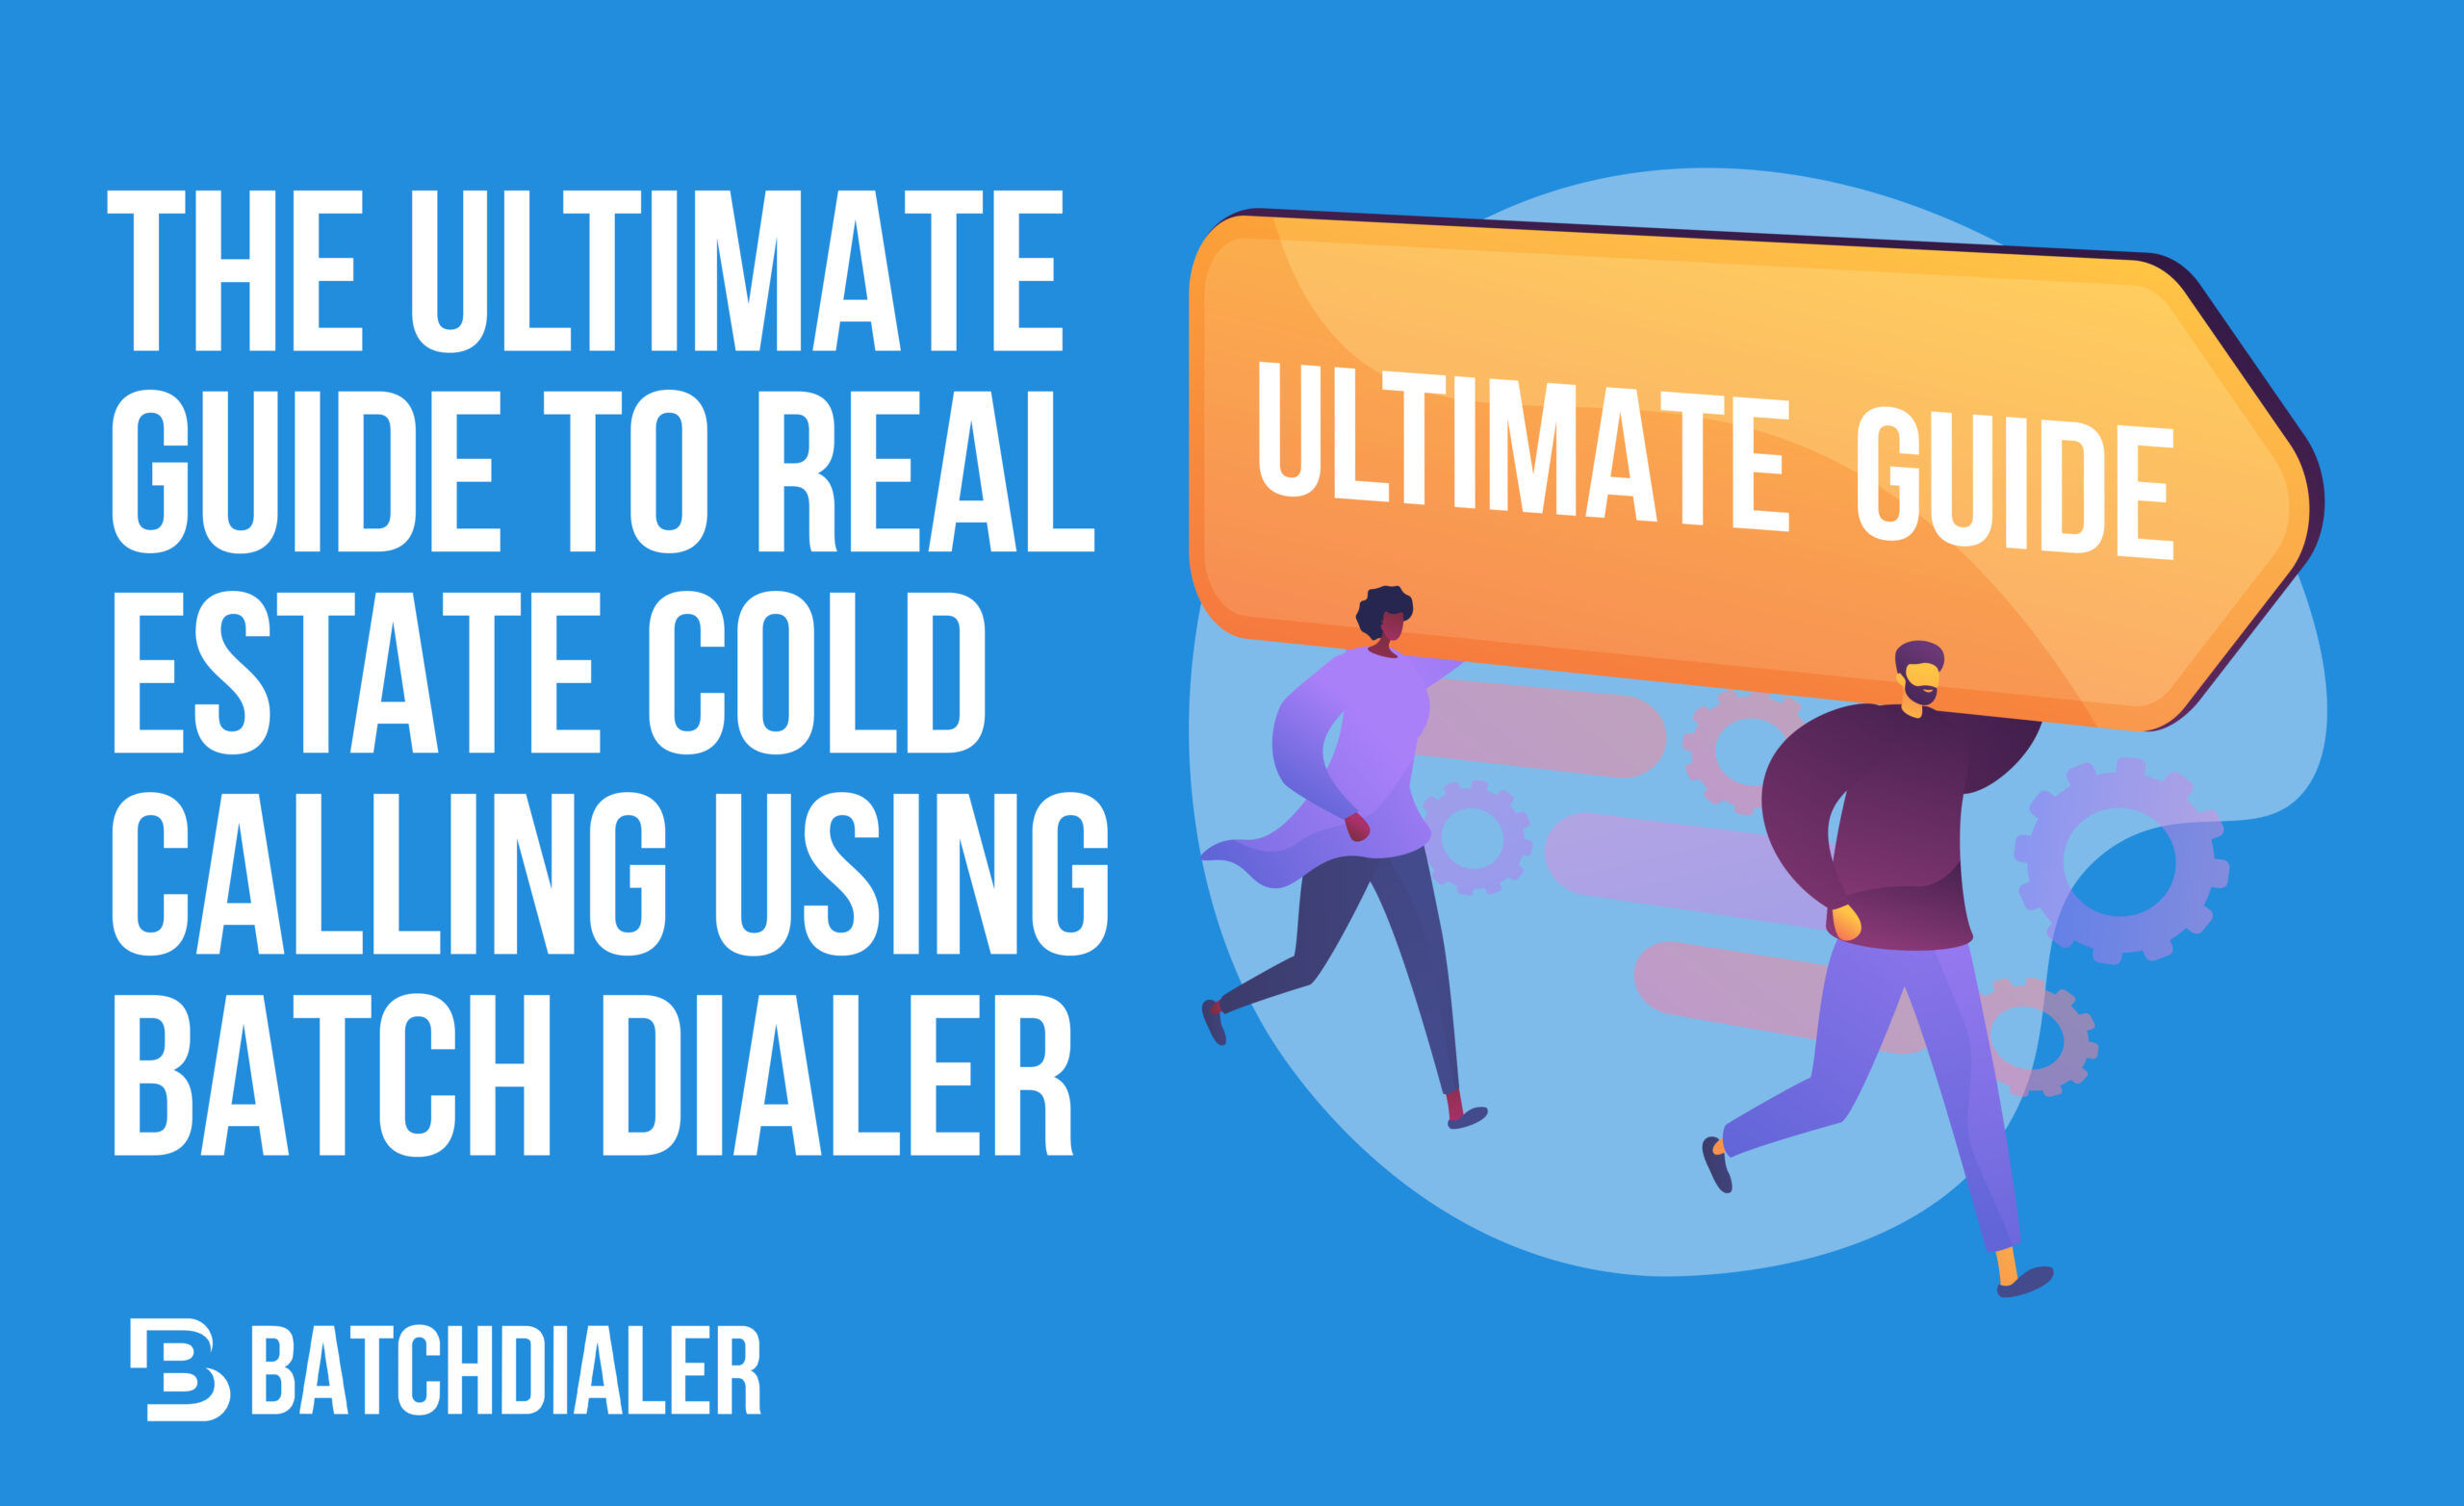 The Ultimate Guide To Real Estate Cold Calling Using Batch Dialer